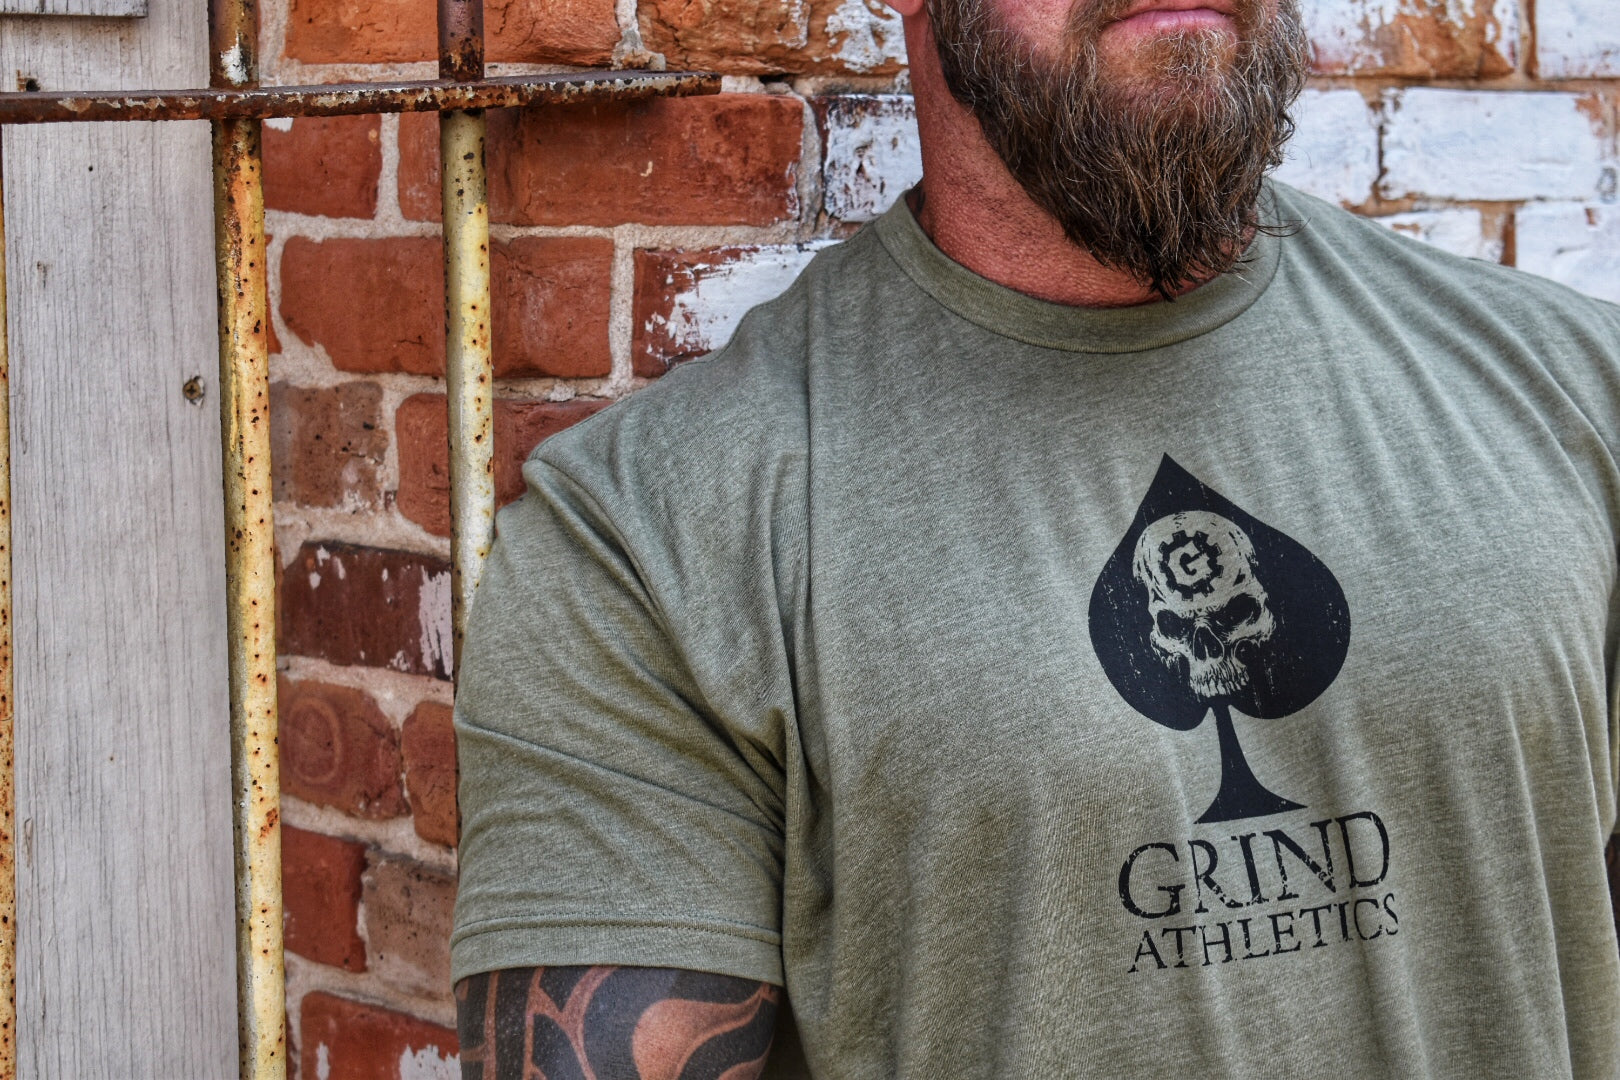 The Grind Athletics Complacency Kills